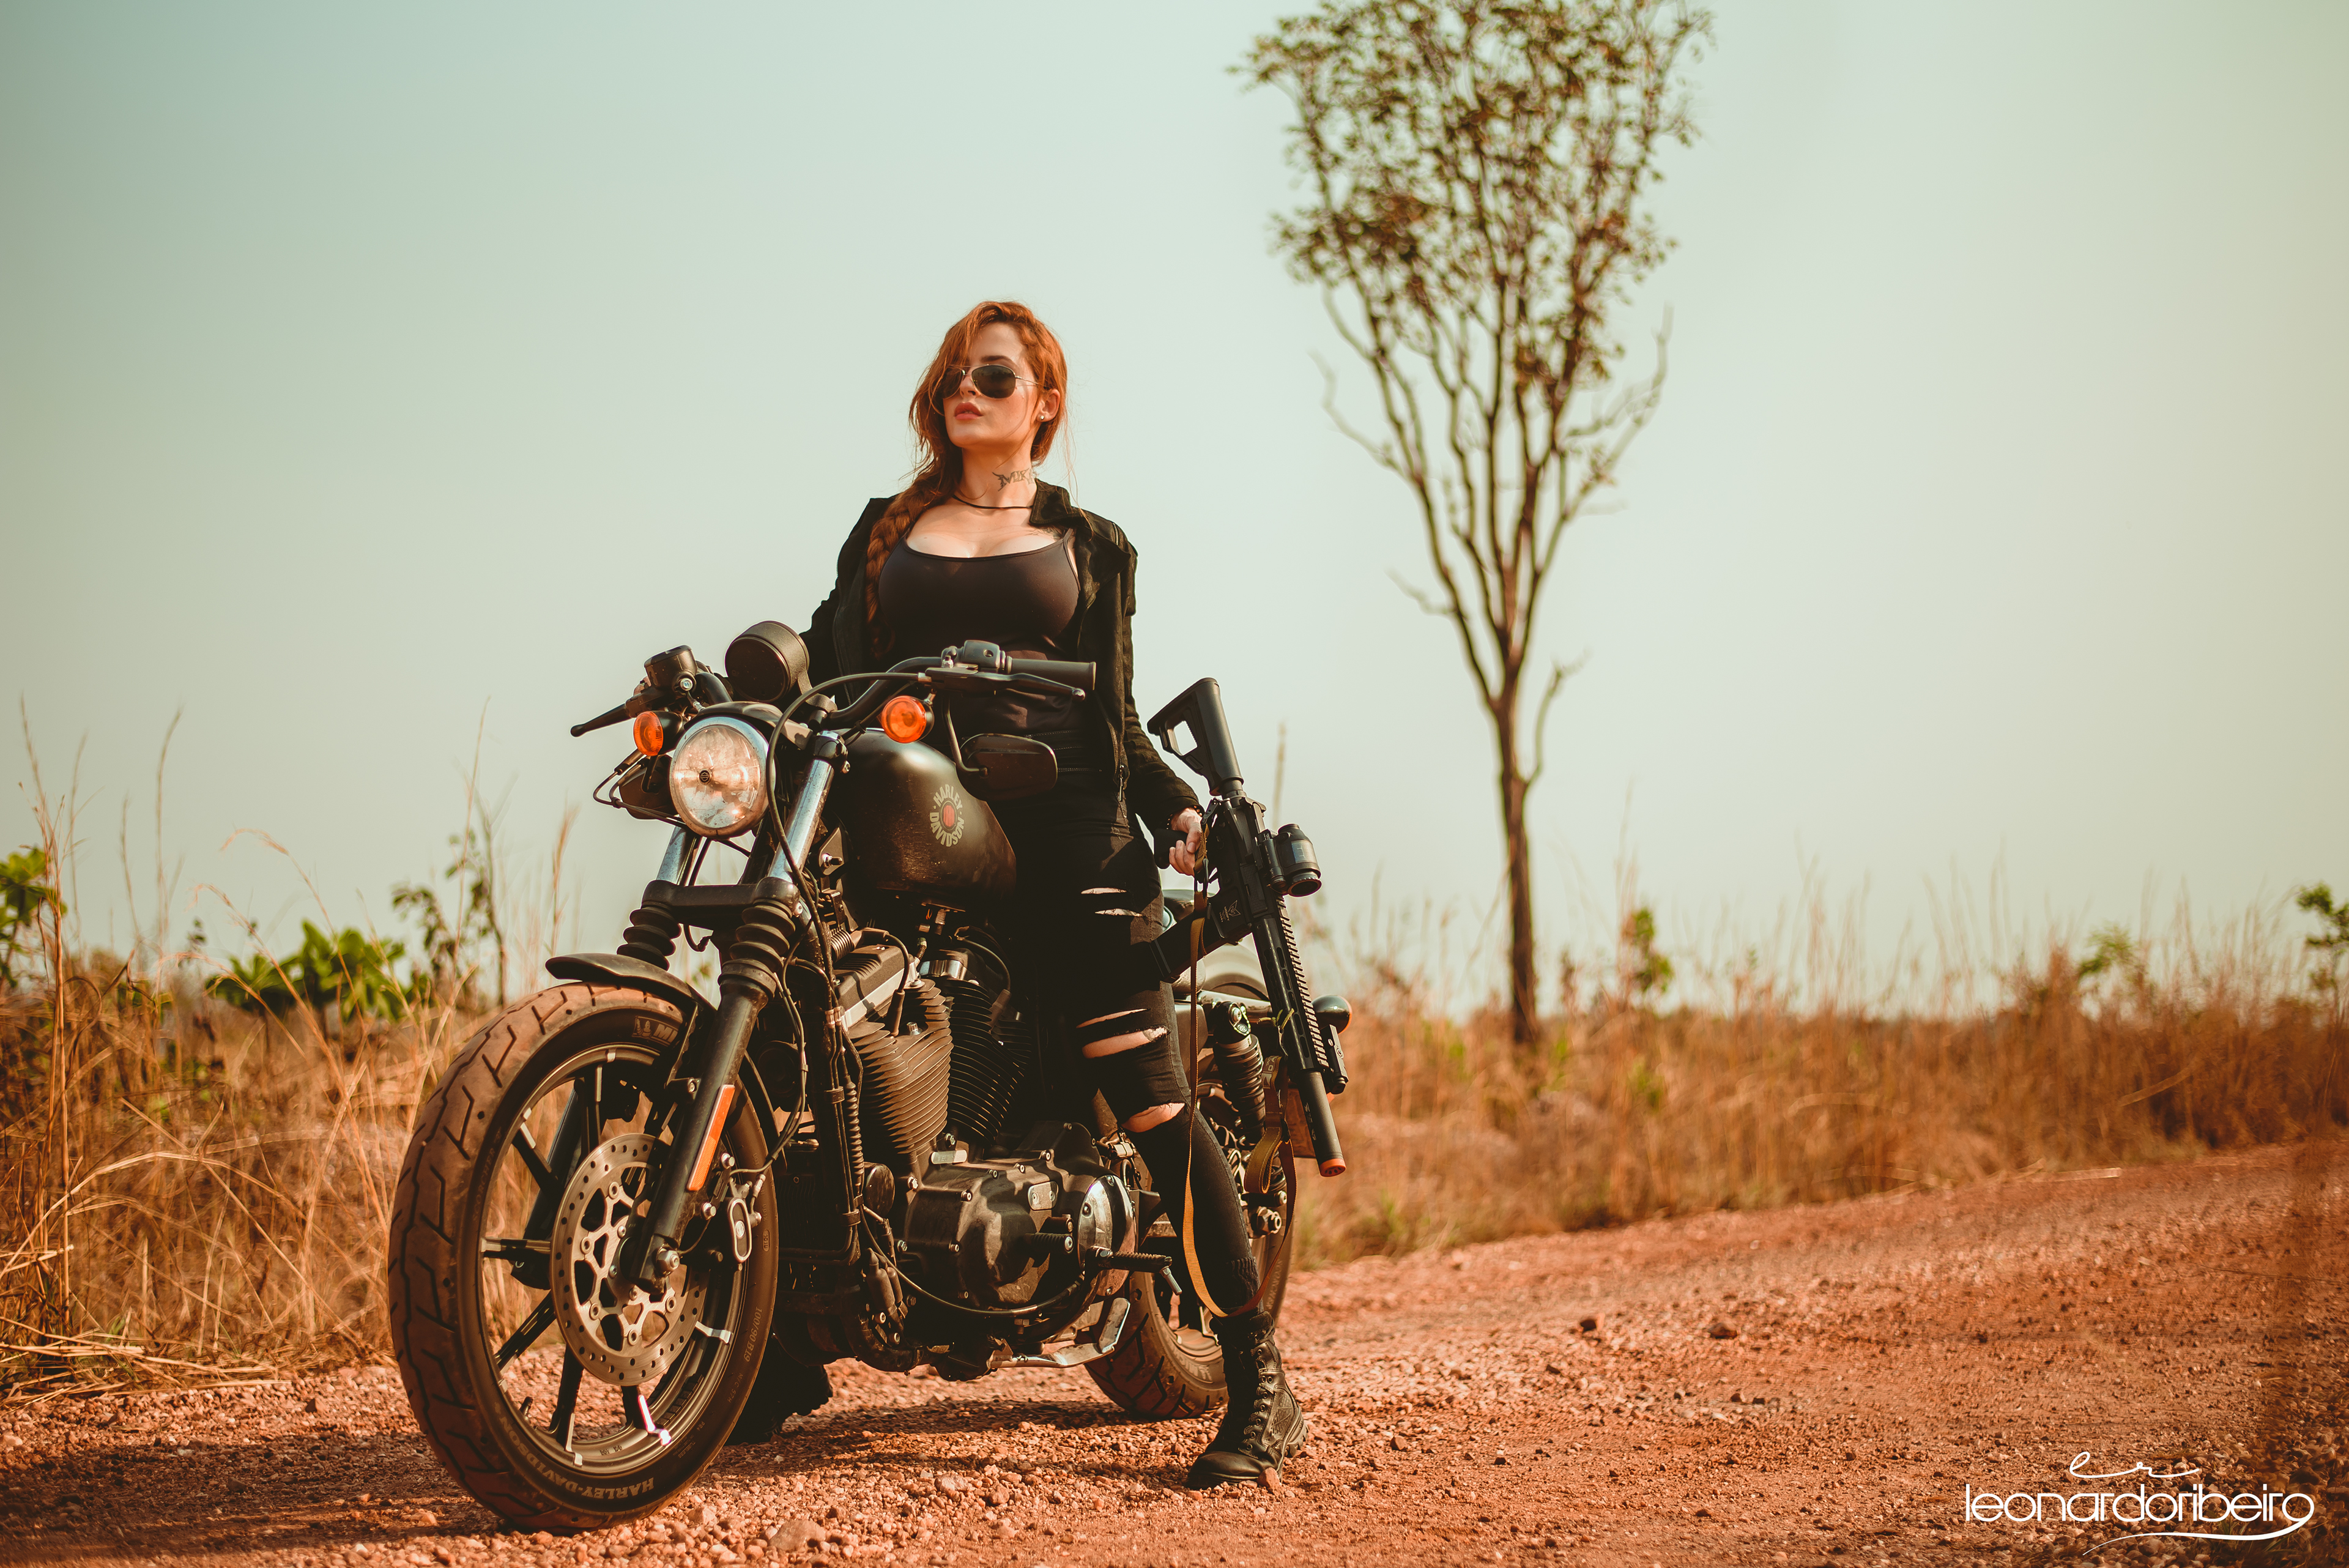 People 3840x2563 Leonardo Ribeiro women model redhead black clothing jeans torn jeans weapon motorcycle women with motorcycles women outdoors Iron 883 Harley-Davidson